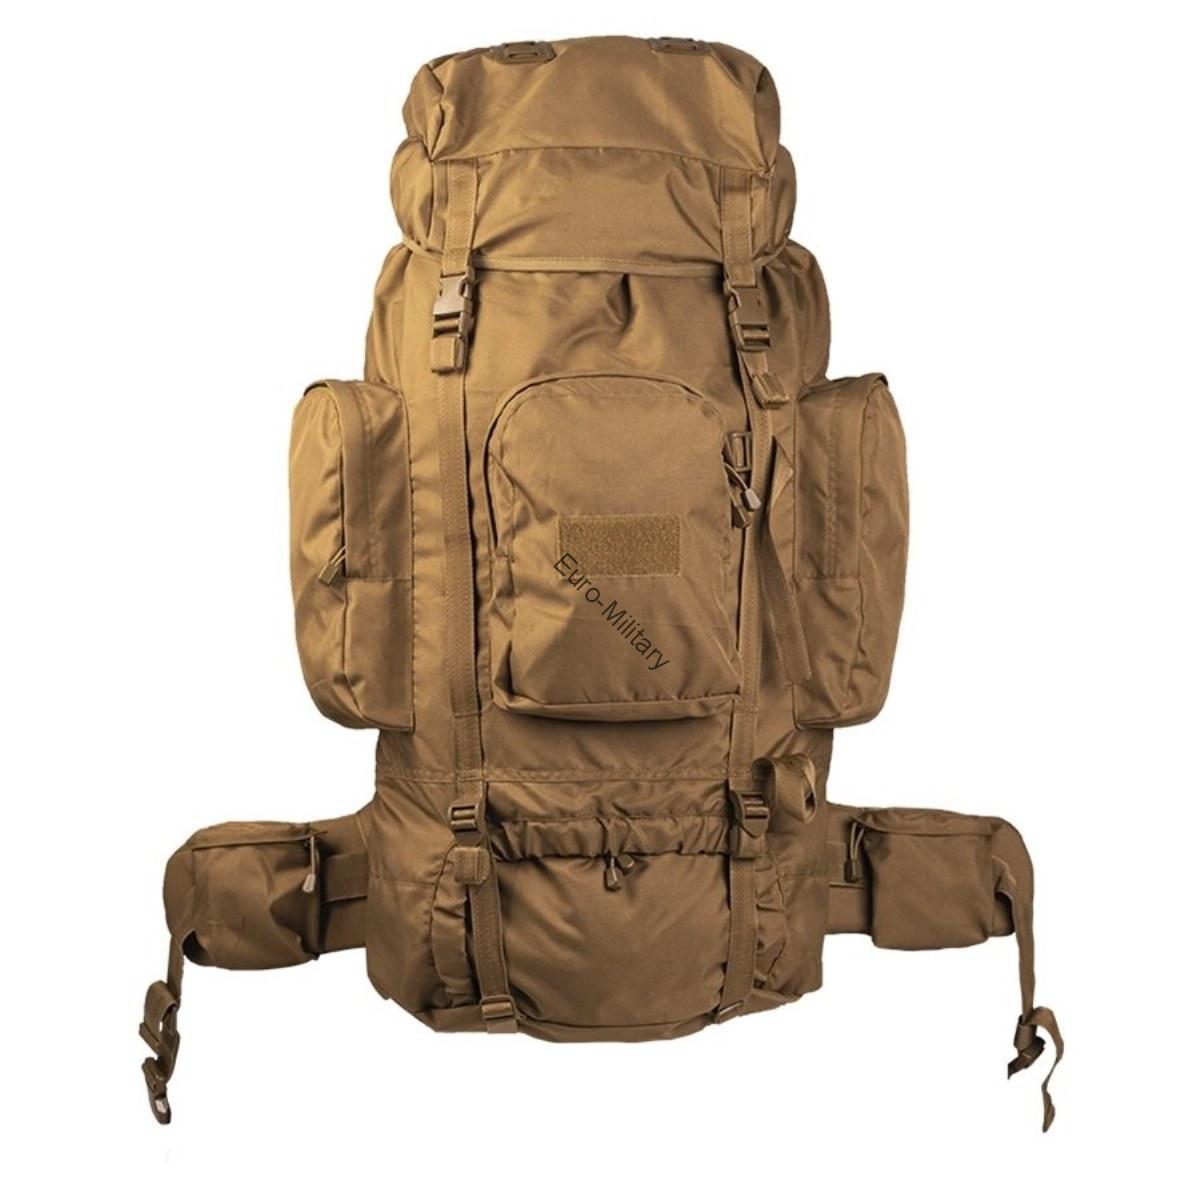 Outdoor Bushcraft Military Hiking Rucksack Backpack RECOM 88L PES - Coyote